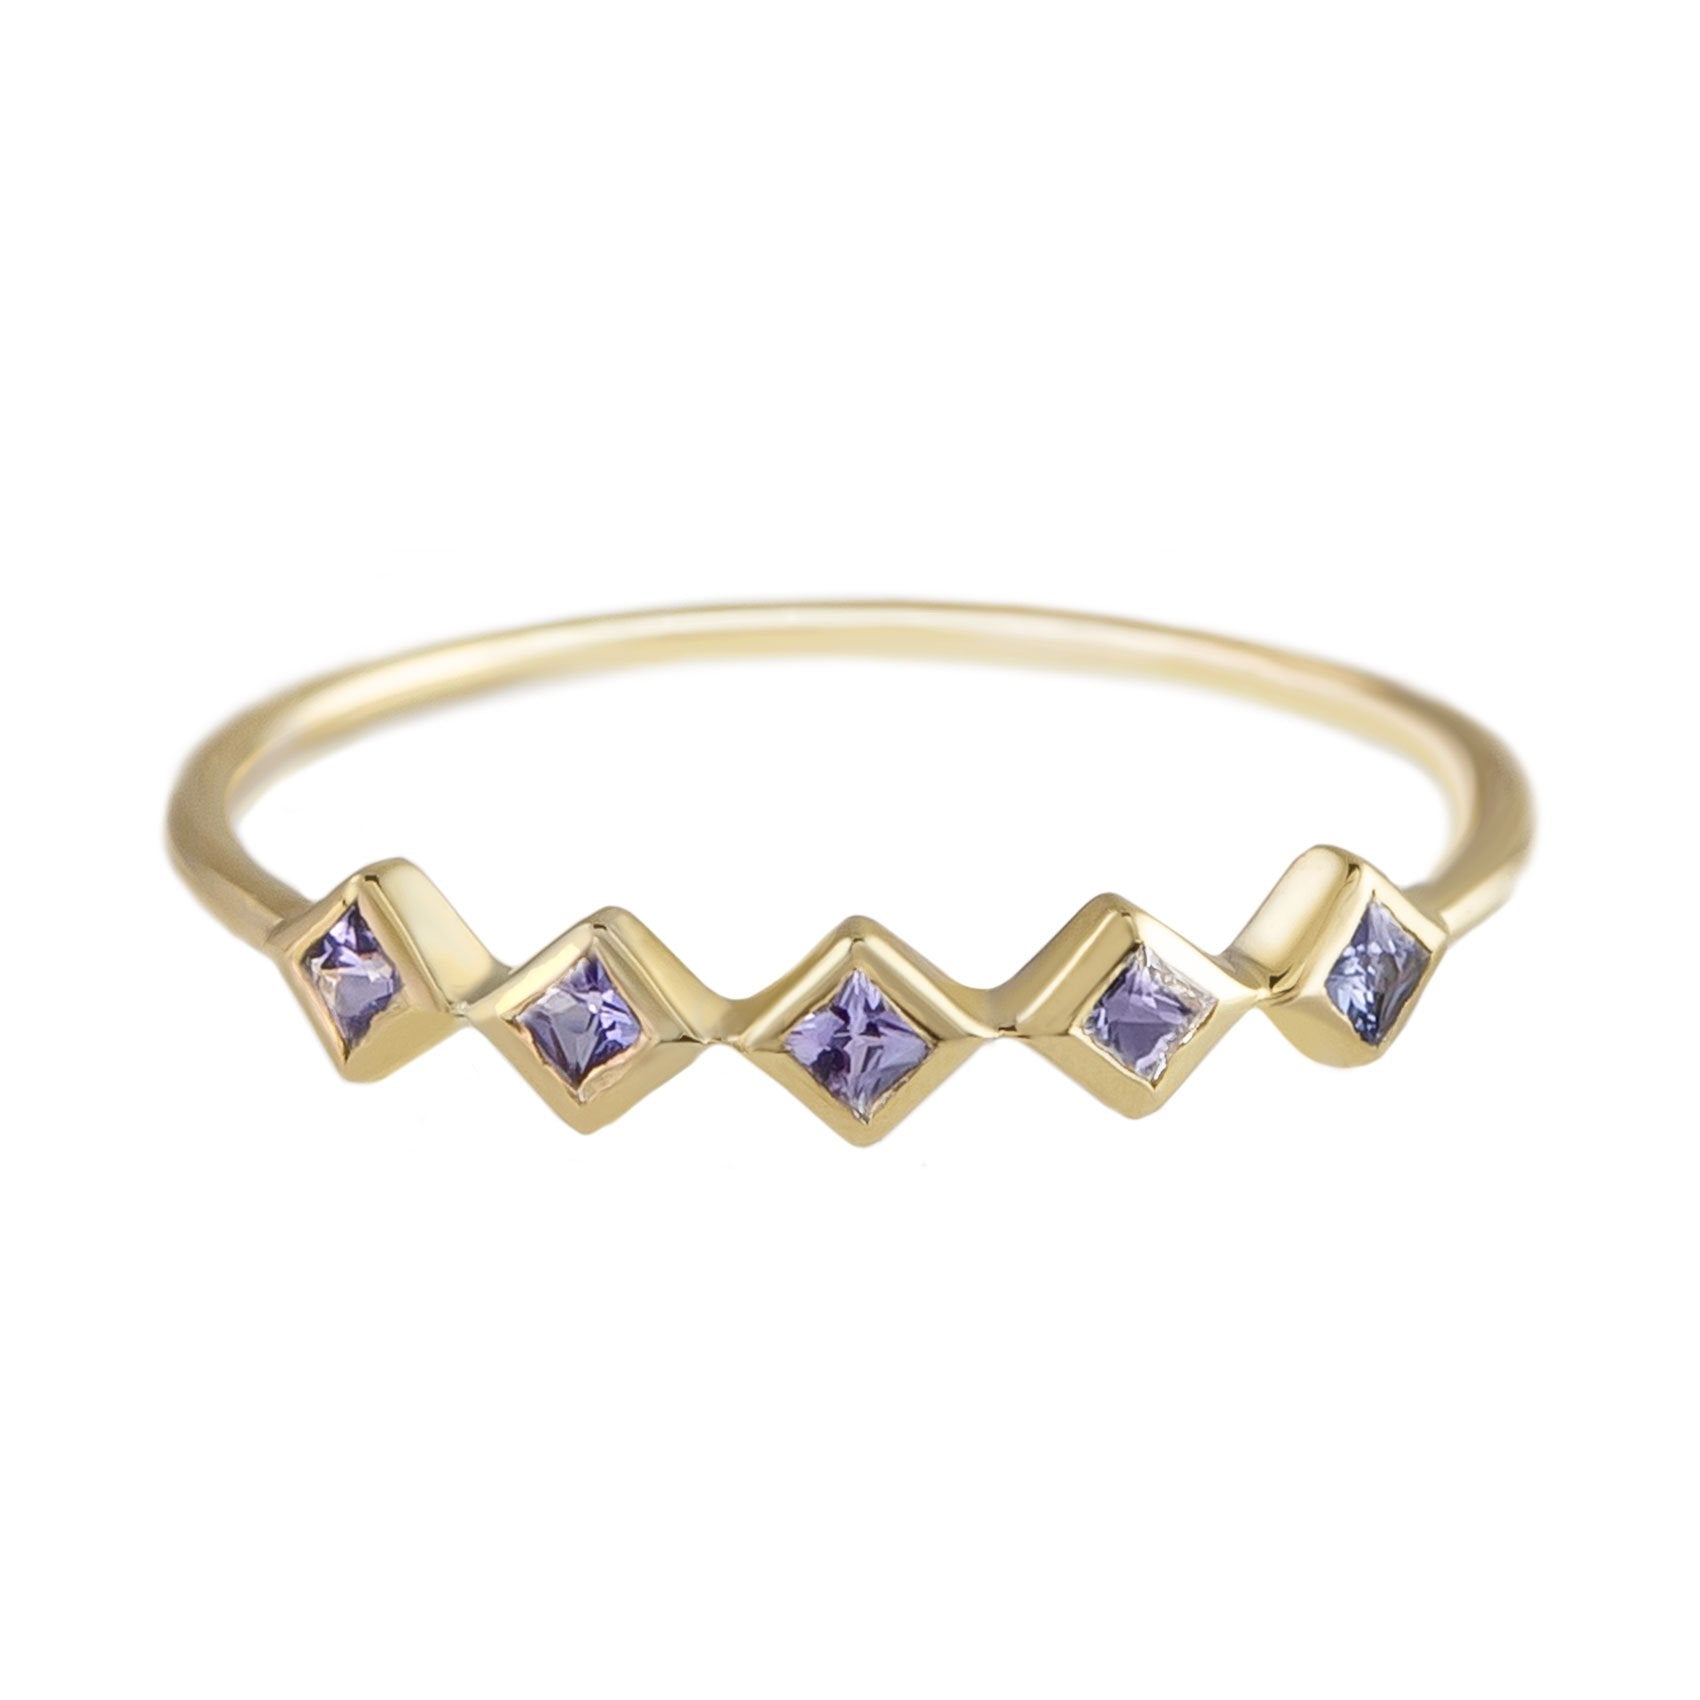 Metier by tomfoolery 5 Stone Tanzanite Ring in 9ct yellow gold with princess cut tanzanites